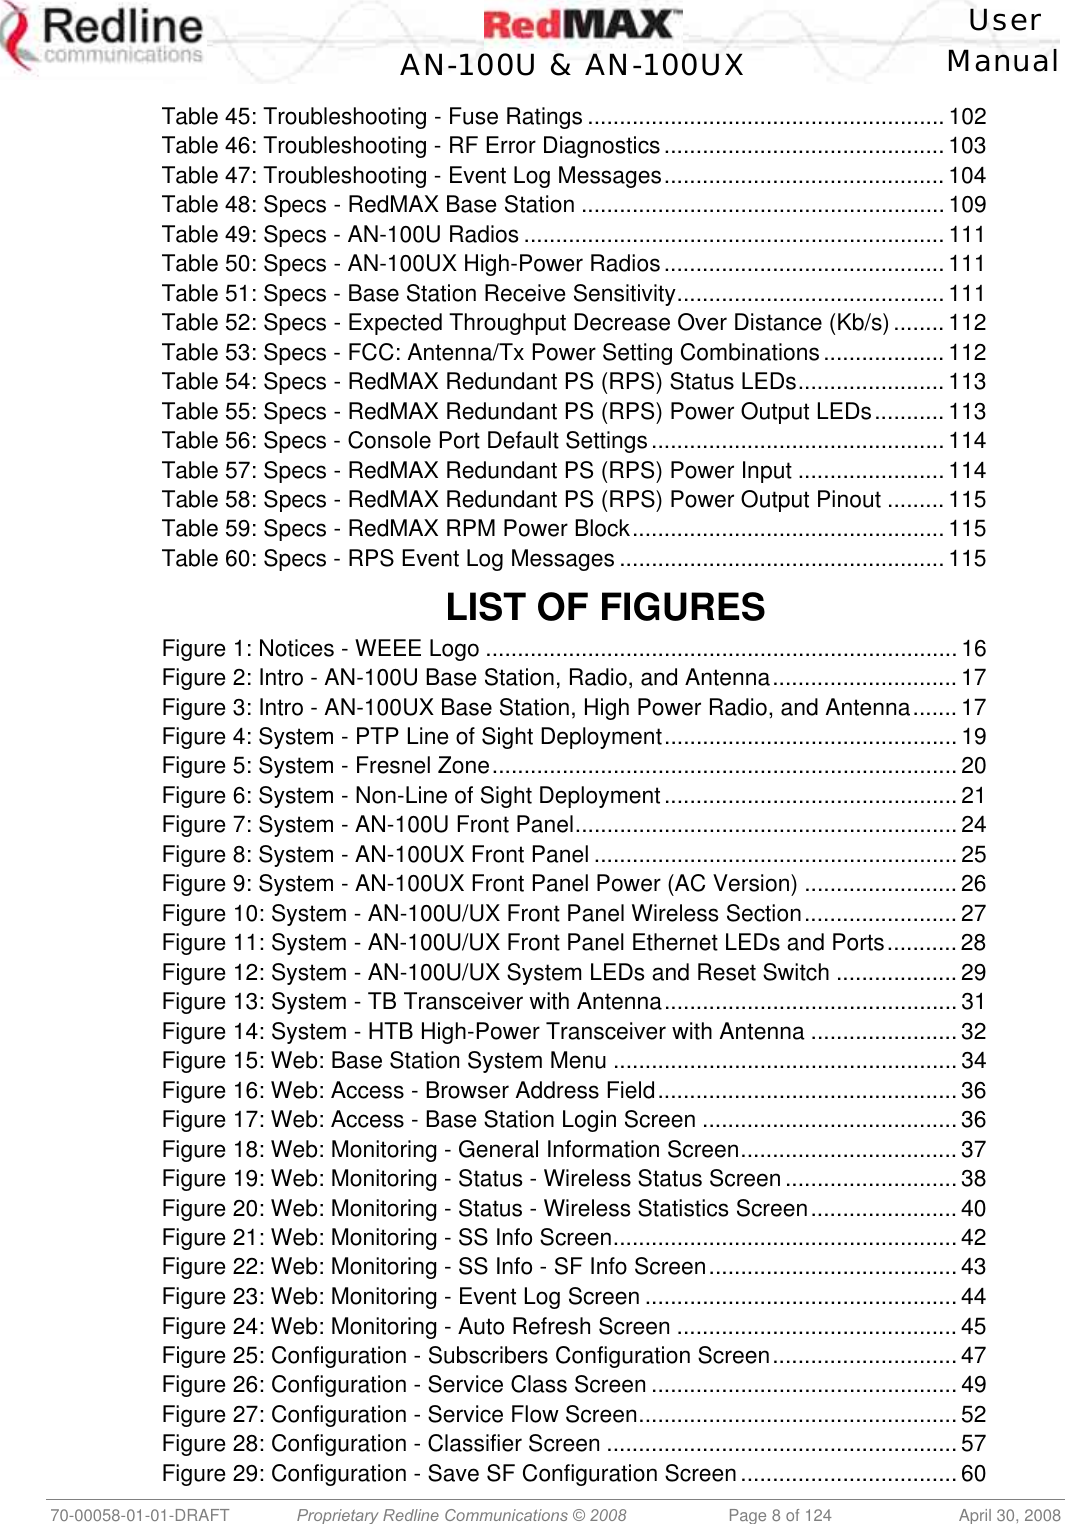    User  AN-100U &amp; AN-100UX Manual   70-00058-01-01-DRAFT  Proprietary Redline Communications © 2008   Page 8 of 124  April 30, 2008 Table 45: Troubleshooting - Fuse Ratings ........................................................ 102 Table 46: Troubleshooting - RF Error Diagnostics............................................ 103 Table 47: Troubleshooting - Event Log Messages............................................ 104 Table 48: Specs - RedMAX Base Station ......................................................... 109 Table 49: Specs - AN-100U Radios ..................................................................111 Table 50: Specs - AN-100UX High-Power Radios............................................ 111 Table 51: Specs - Base Station Receive Sensitivity..........................................111 Table 52: Specs - Expected Throughput Decrease Over Distance (Kb/s)........ 112 Table 53: Specs - FCC: Antenna/Tx Power Setting Combinations................... 112 Table 54: Specs - RedMAX Redundant PS (RPS) Status LEDs....................... 113 Table 55: Specs - RedMAX Redundant PS (RPS) Power Output LEDs........... 113 Table 56: Specs - Console Port Default Settings.............................................. 114 Table 57: Specs - RedMAX Redundant PS (RPS) Power Input ....................... 114 Table 58: Specs - RedMAX Redundant PS (RPS) Power Output Pinout ......... 115 Table 59: Specs - RedMAX RPM Power Block................................................. 115 Table 60: Specs - RPS Event Log Messages ................................................... 115  LIST OF FIGURES Figure 1: Notices - WEEE Logo .......................................................................... 16 Figure 2: Intro - AN-100U Base Station, Radio, and Antenna............................. 17 Figure 3: Intro - AN-100UX Base Station, High Power Radio, and Antenna....... 17 Figure 4: System - PTP Line of Sight Deployment.............................................. 19 Figure 5: System - Fresnel Zone......................................................................... 20 Figure 6: System - Non-Line of Sight Deployment.............................................. 21 Figure 7: System - AN-100U Front Panel............................................................ 24 Figure 8: System - AN-100UX Front Panel ......................................................... 25 Figure 9: System - AN-100UX Front Panel Power (AC Version) ........................26 Figure 10: System - AN-100U/UX Front Panel Wireless Section........................ 27 Figure 11: System - AN-100U/UX Front Panel Ethernet LEDs and Ports........... 28 Figure 12: System - AN-100U/UX System LEDs and Reset Switch ................... 29 Figure 13: System - TB Transceiver with Antenna.............................................. 31 Figure 14: System - HTB High-Power Transceiver with Antenna .......................32 Figure 15: Web: Base Station System Menu ...................................................... 34 Figure 16: Web: Access - Browser Address Field............................................... 36 Figure 17: Web: Access - Base Station Login Screen ........................................ 36 Figure 18: Web: Monitoring - General Information Screen..................................37 Figure 19: Web: Monitoring - Status - Wireless Status Screen........................... 38 Figure 20: Web: Monitoring - Status - Wireless Statistics Screen....................... 40 Figure 21: Web: Monitoring - SS Info Screen...................................................... 42 Figure 22: Web: Monitoring - SS Info - SF Info Screen....................................... 43 Figure 23: Web: Monitoring - Event Log Screen ................................................. 44 Figure 24: Web: Monitoring - Auto Refresh Screen ............................................ 45 Figure 25: Configuration - Subscribers Configuration Screen............................. 47 Figure 26: Configuration - Service Class Screen ................................................ 49 Figure 27: Configuration - Service Flow Screen.................................................. 52 Figure 28: Configuration - Classifier Screen ....................................................... 57 Figure 29: Configuration - Save SF Configuration Screen.................................. 60 